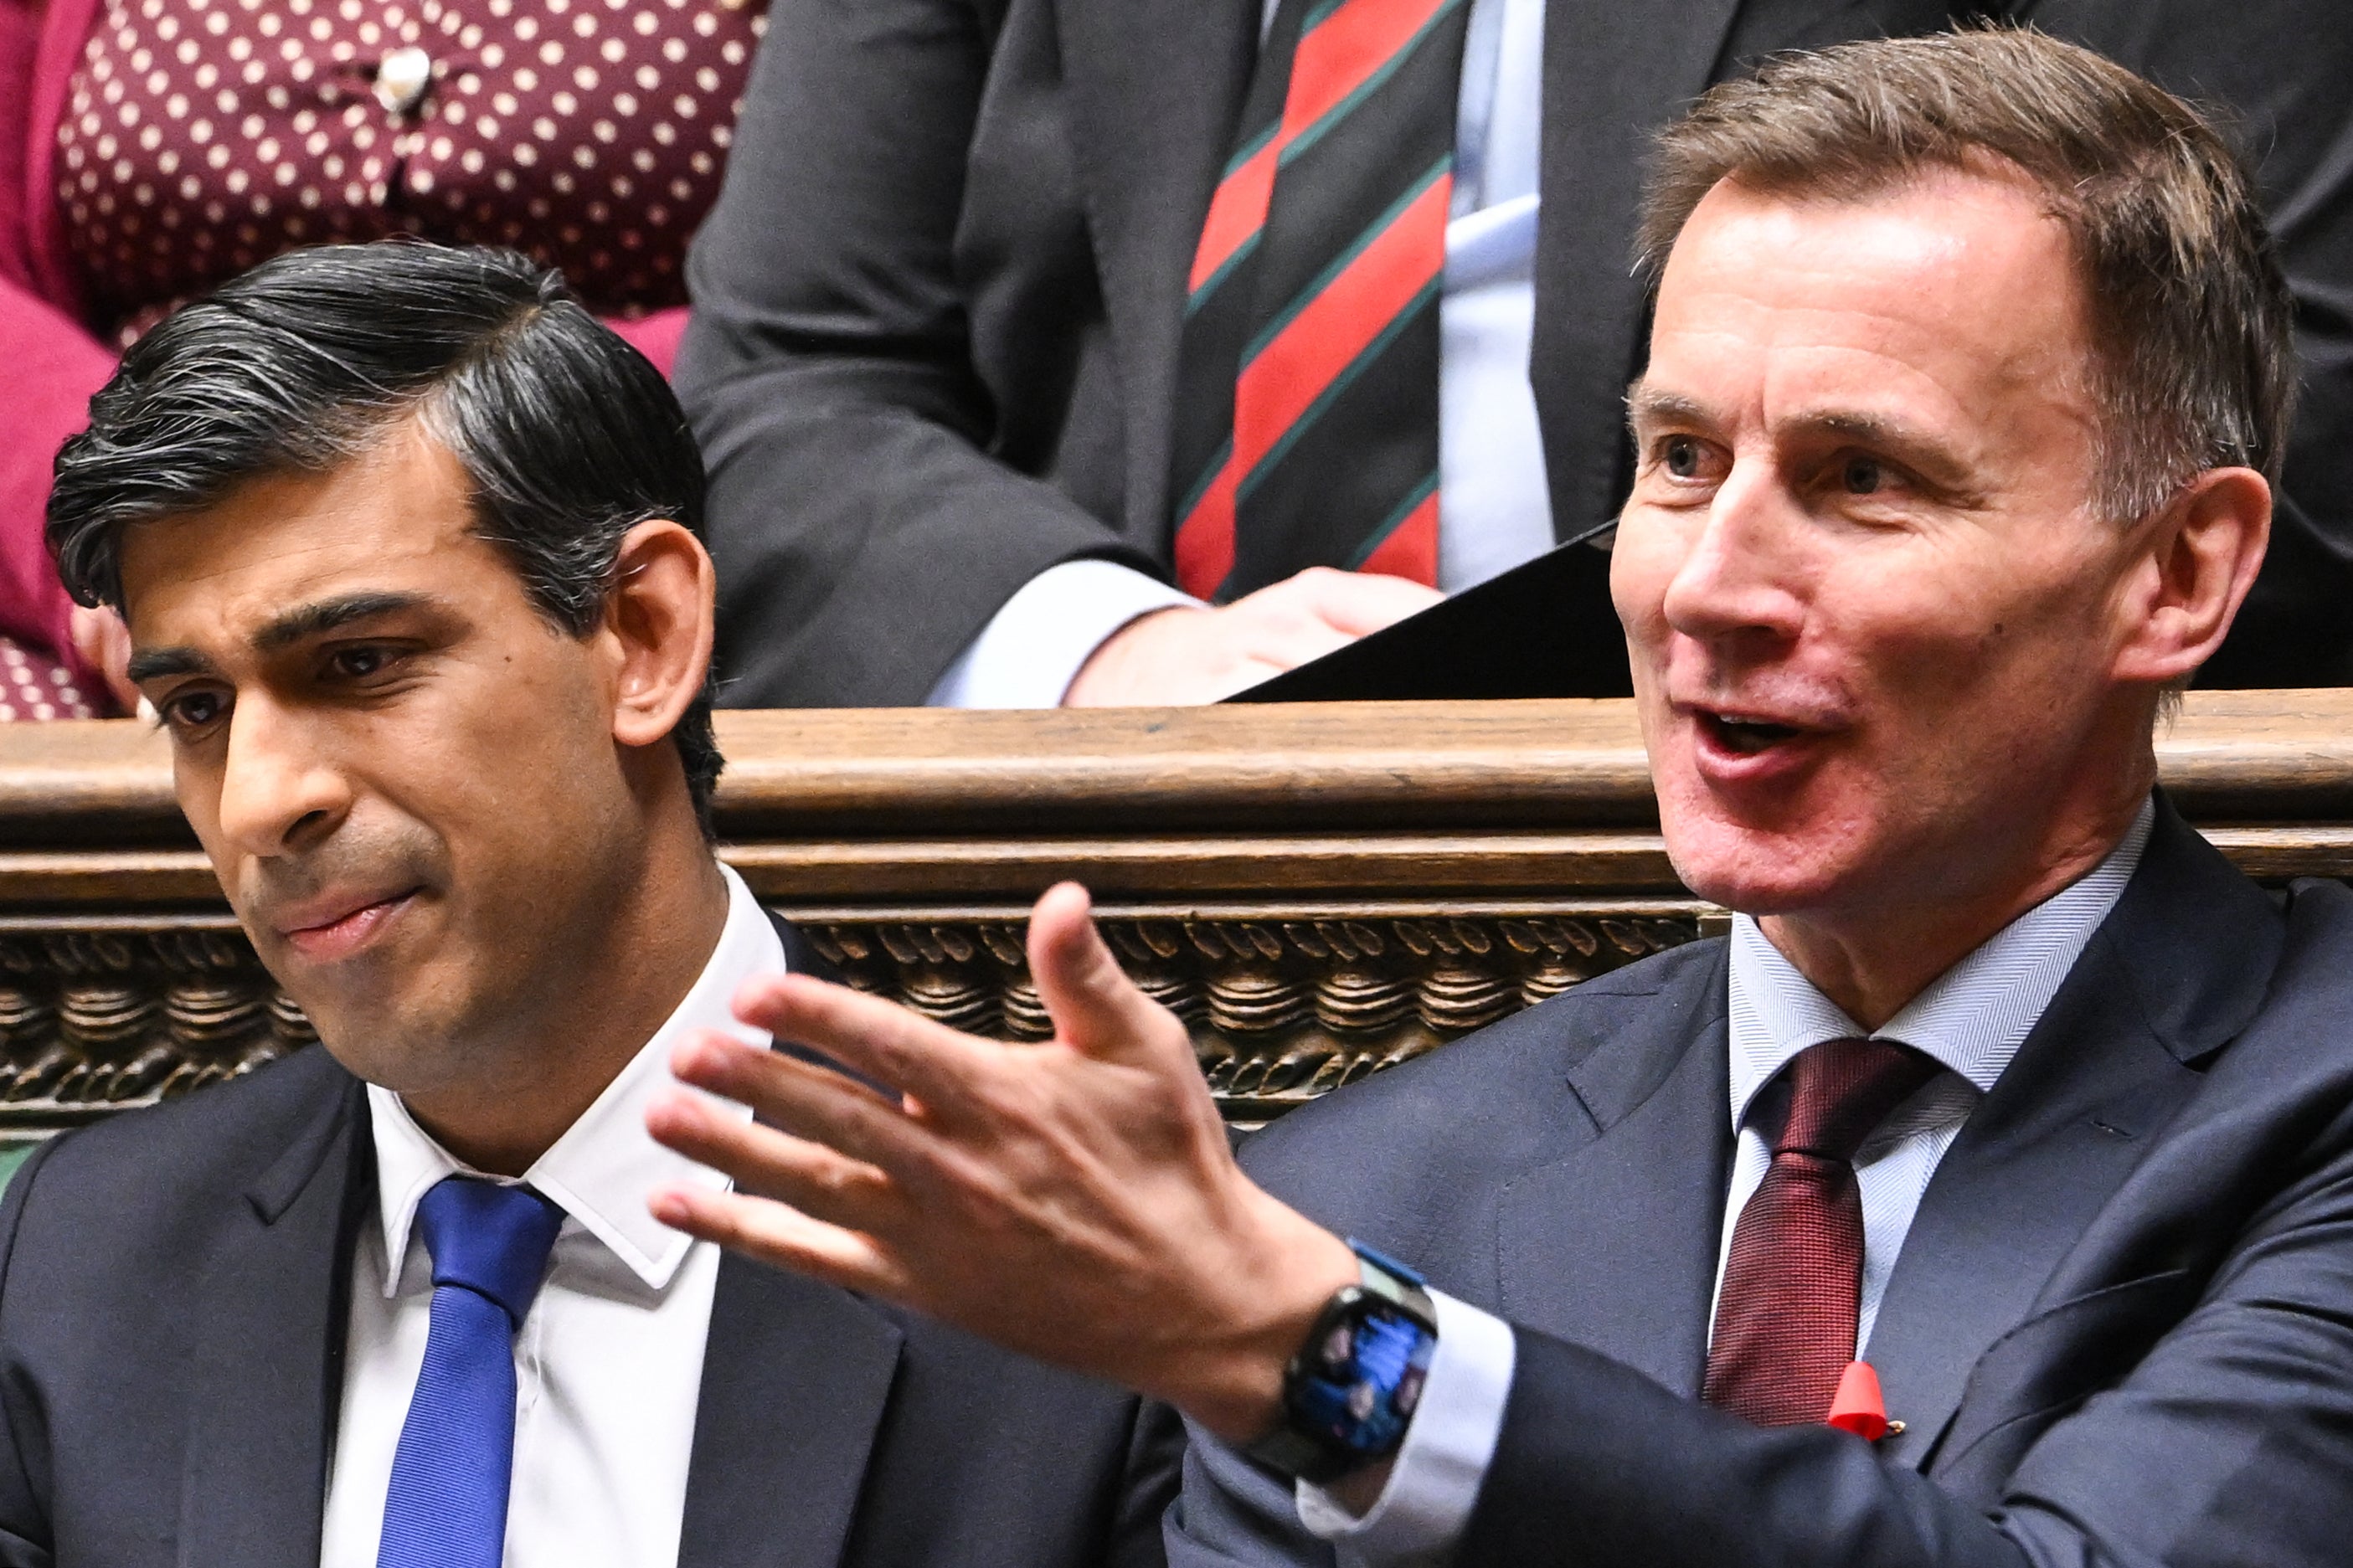 The prime minister Rishi Sunak and his chancellor Jeremy Hunt seem attracted by the idea of reducing inheritance tax